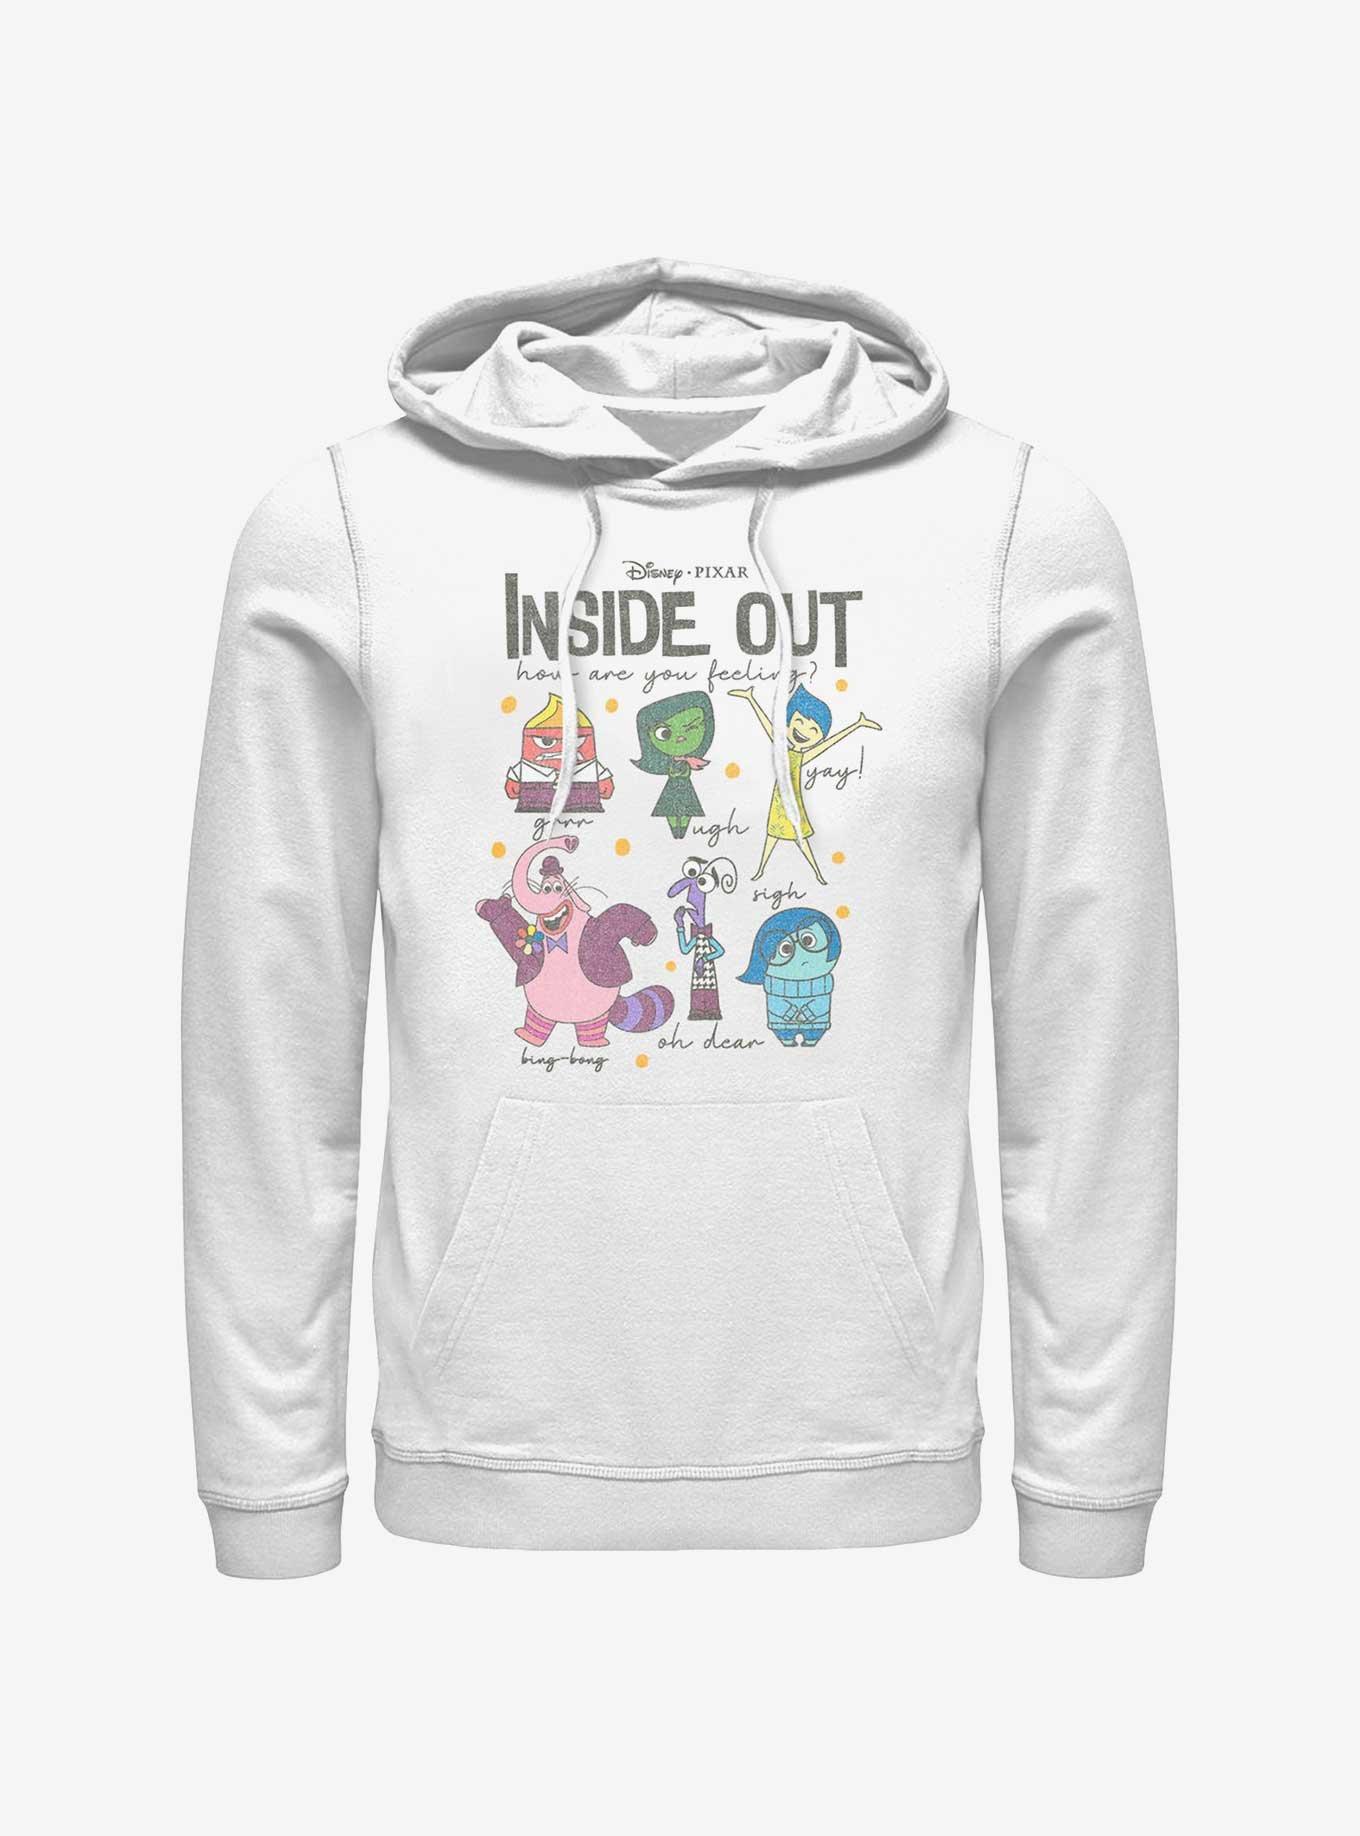 Disney Pixar Inside Out 2 All The Feels Hoodie, WHITE, hi-res